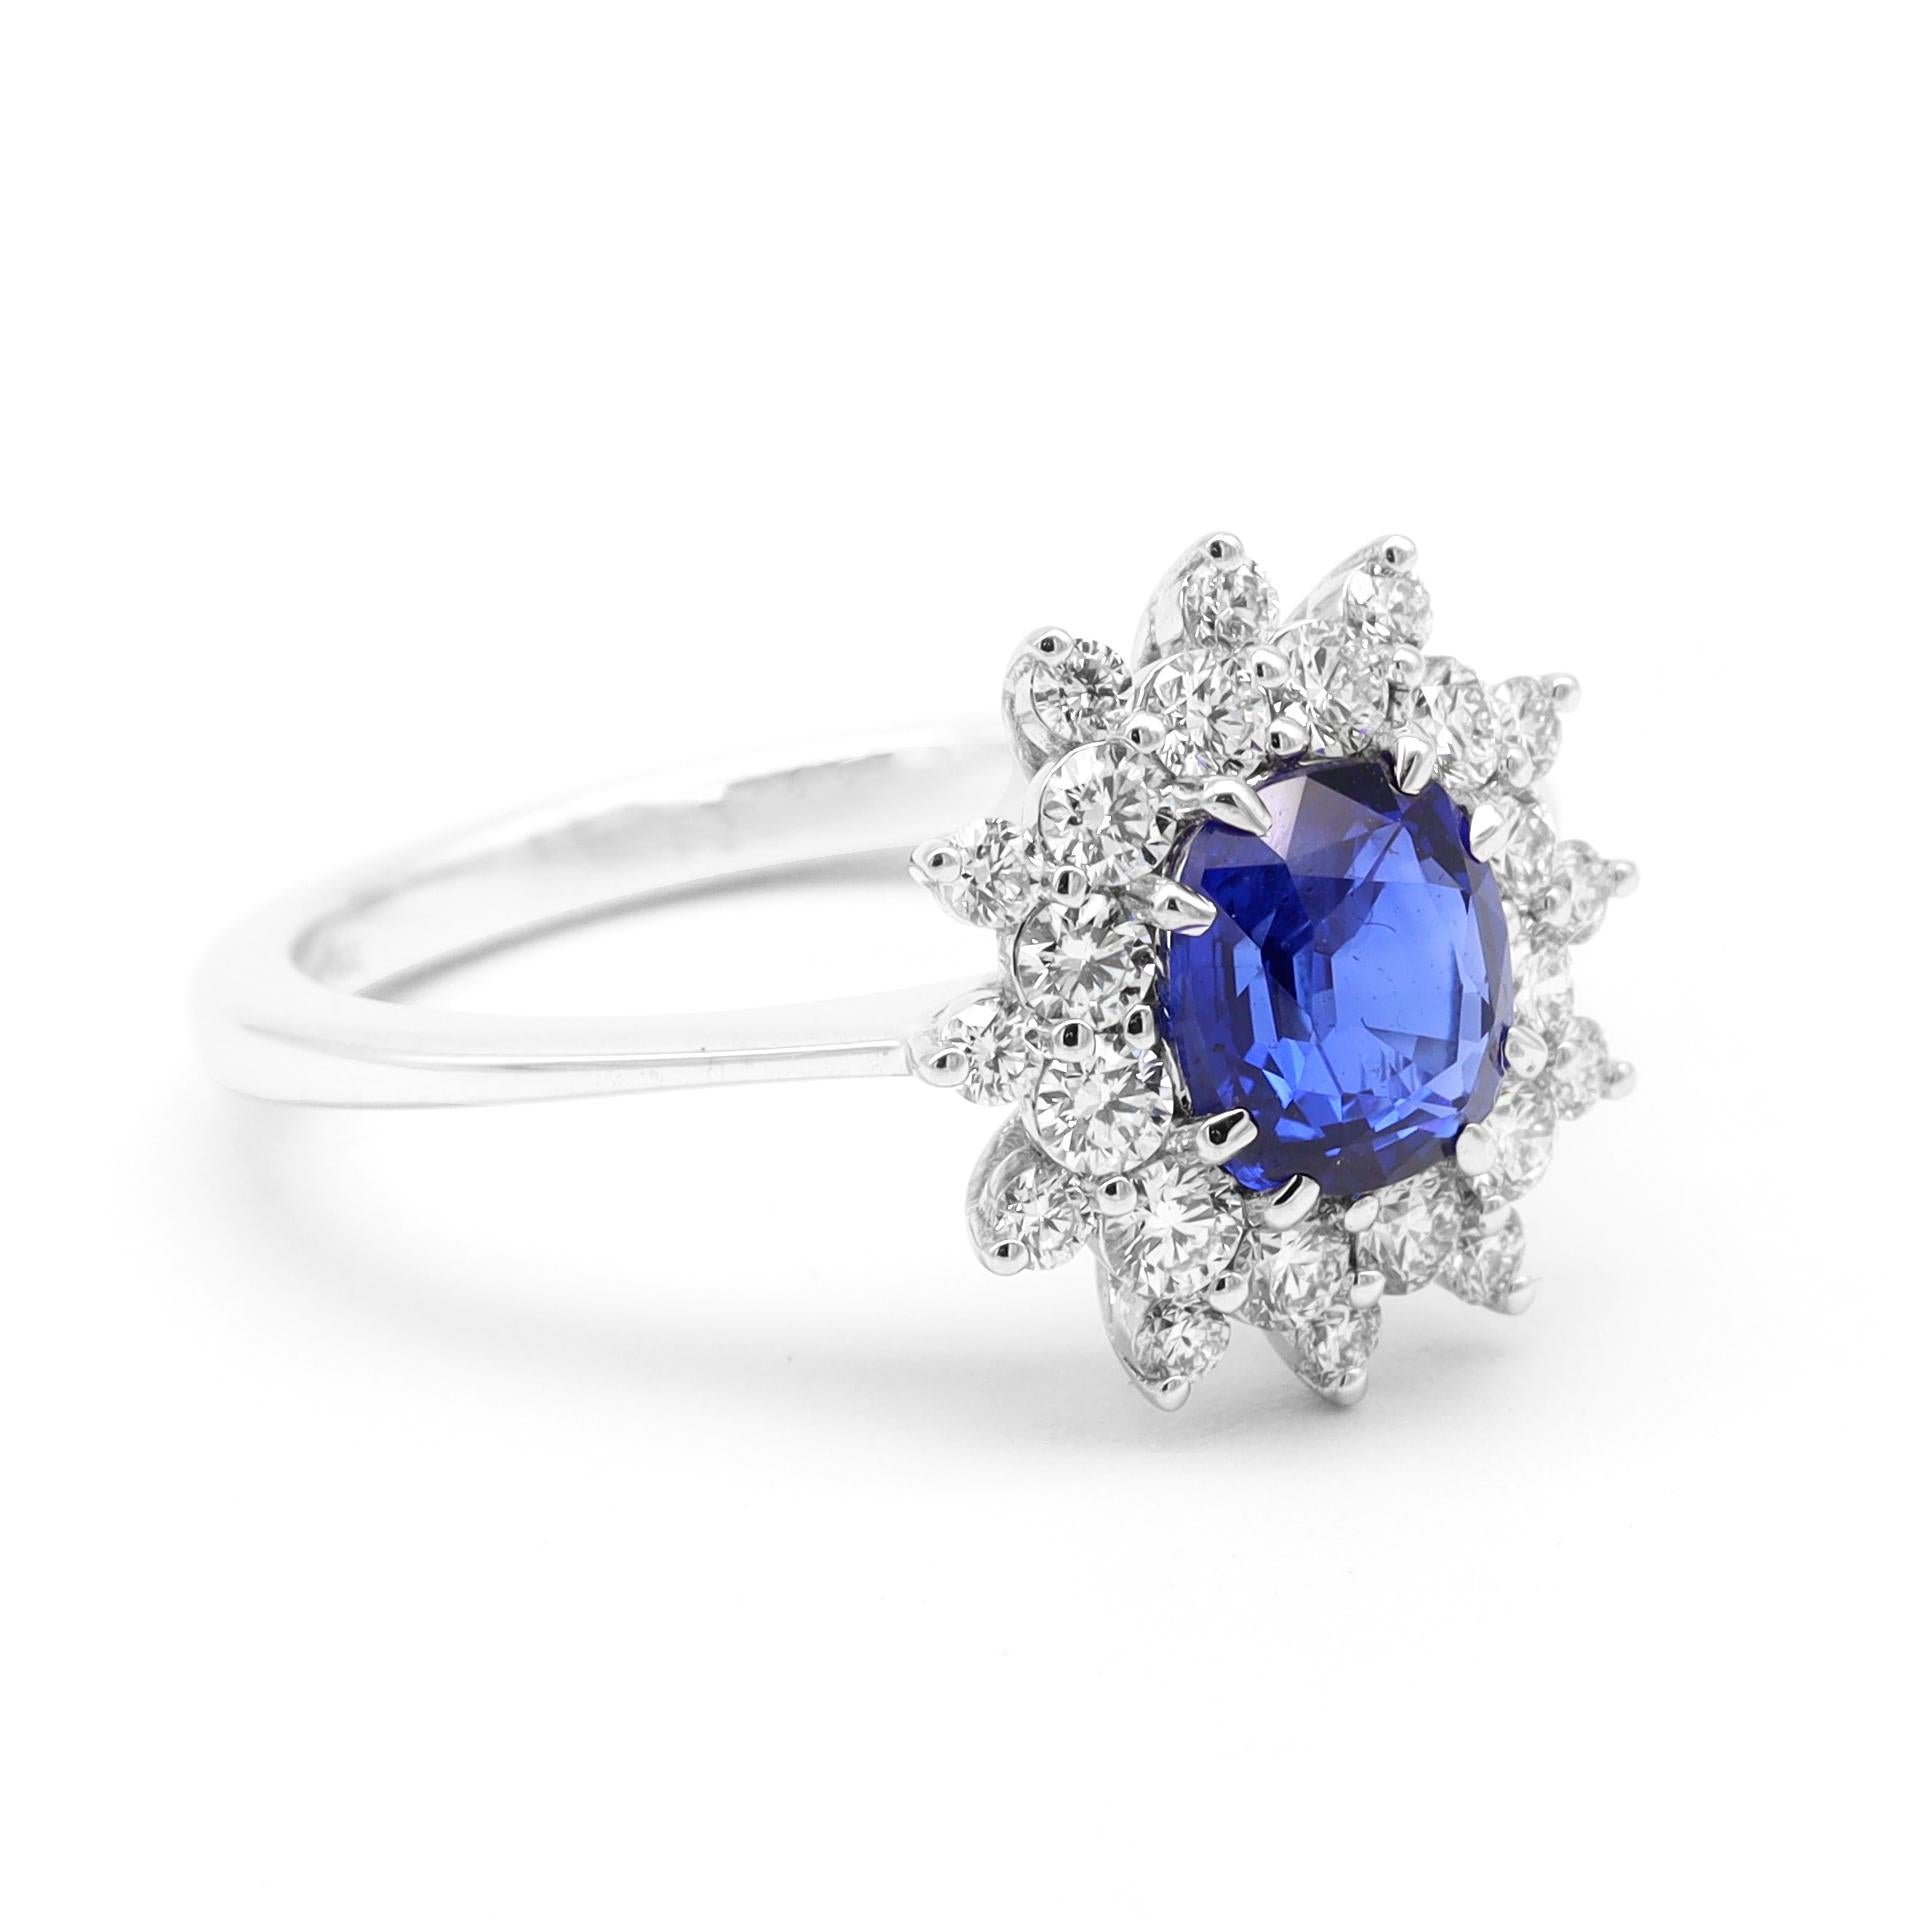 18 Karat White Gold 1.30 Carat Blue Sapphire Oval-Cut and Diamond Cluster Ring

This incredible Egyptian blue sapphire color and diamond ring is electrifying. The transparent oval cut 8-eagle prong set blue sapphire is rightly surrounded by the